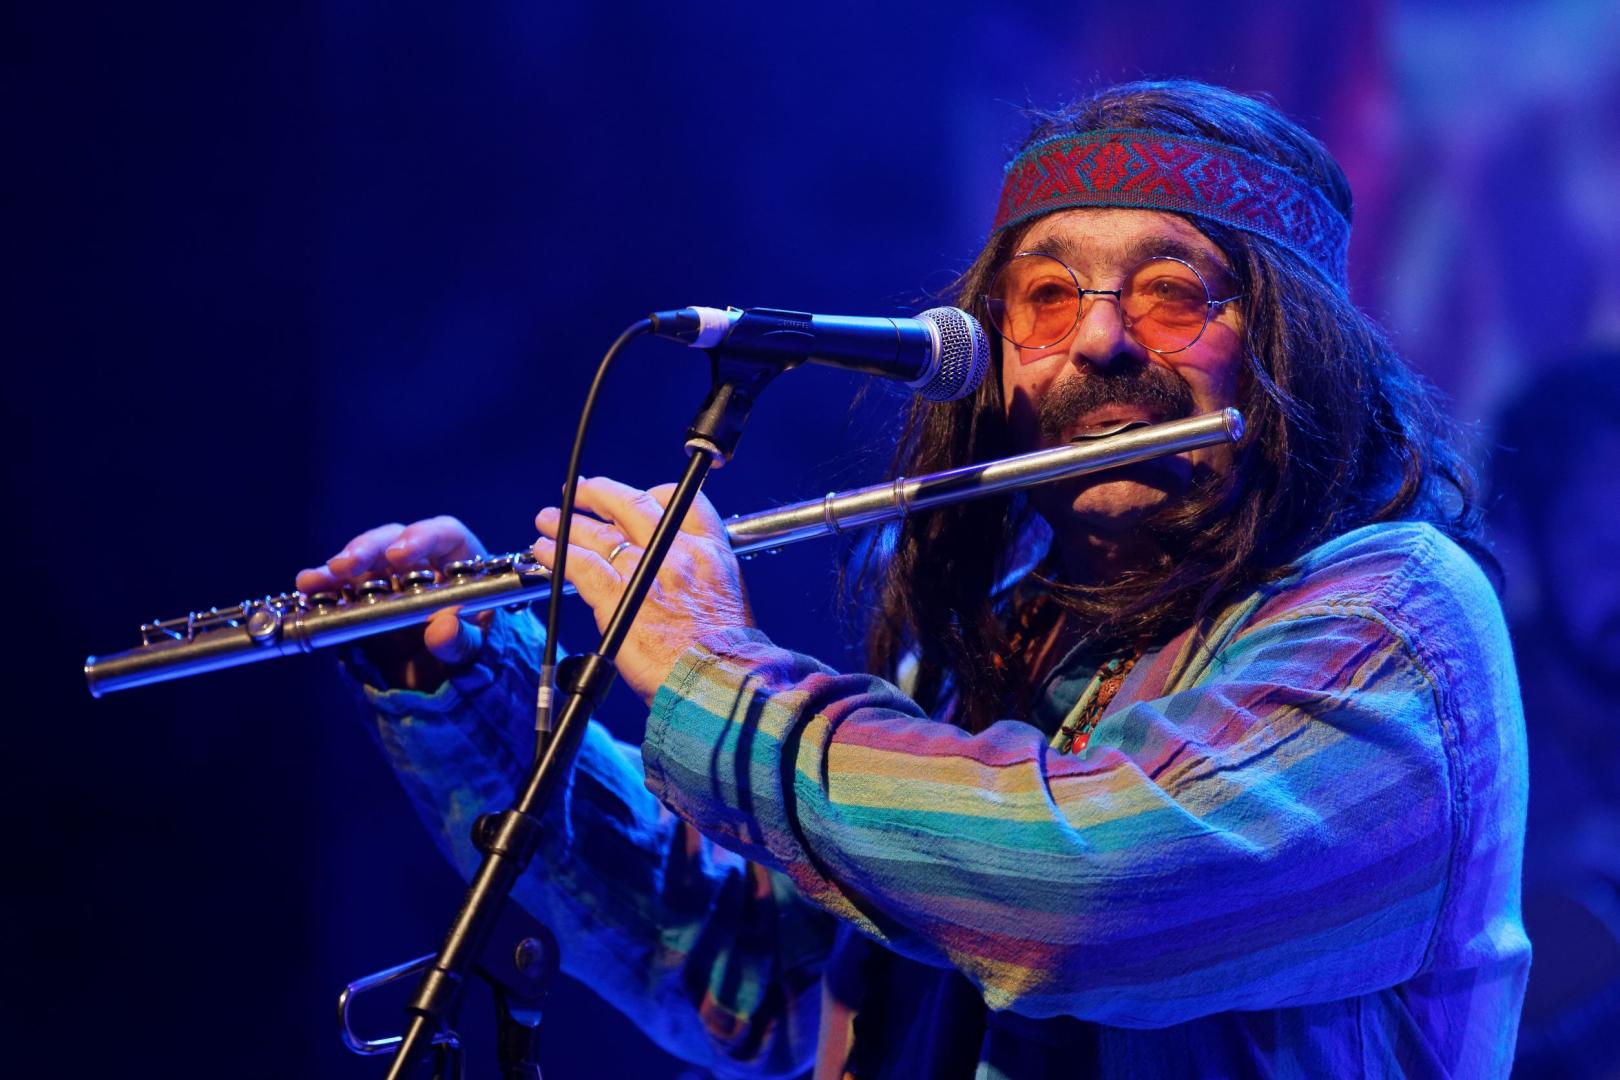 Hippie playing a flute